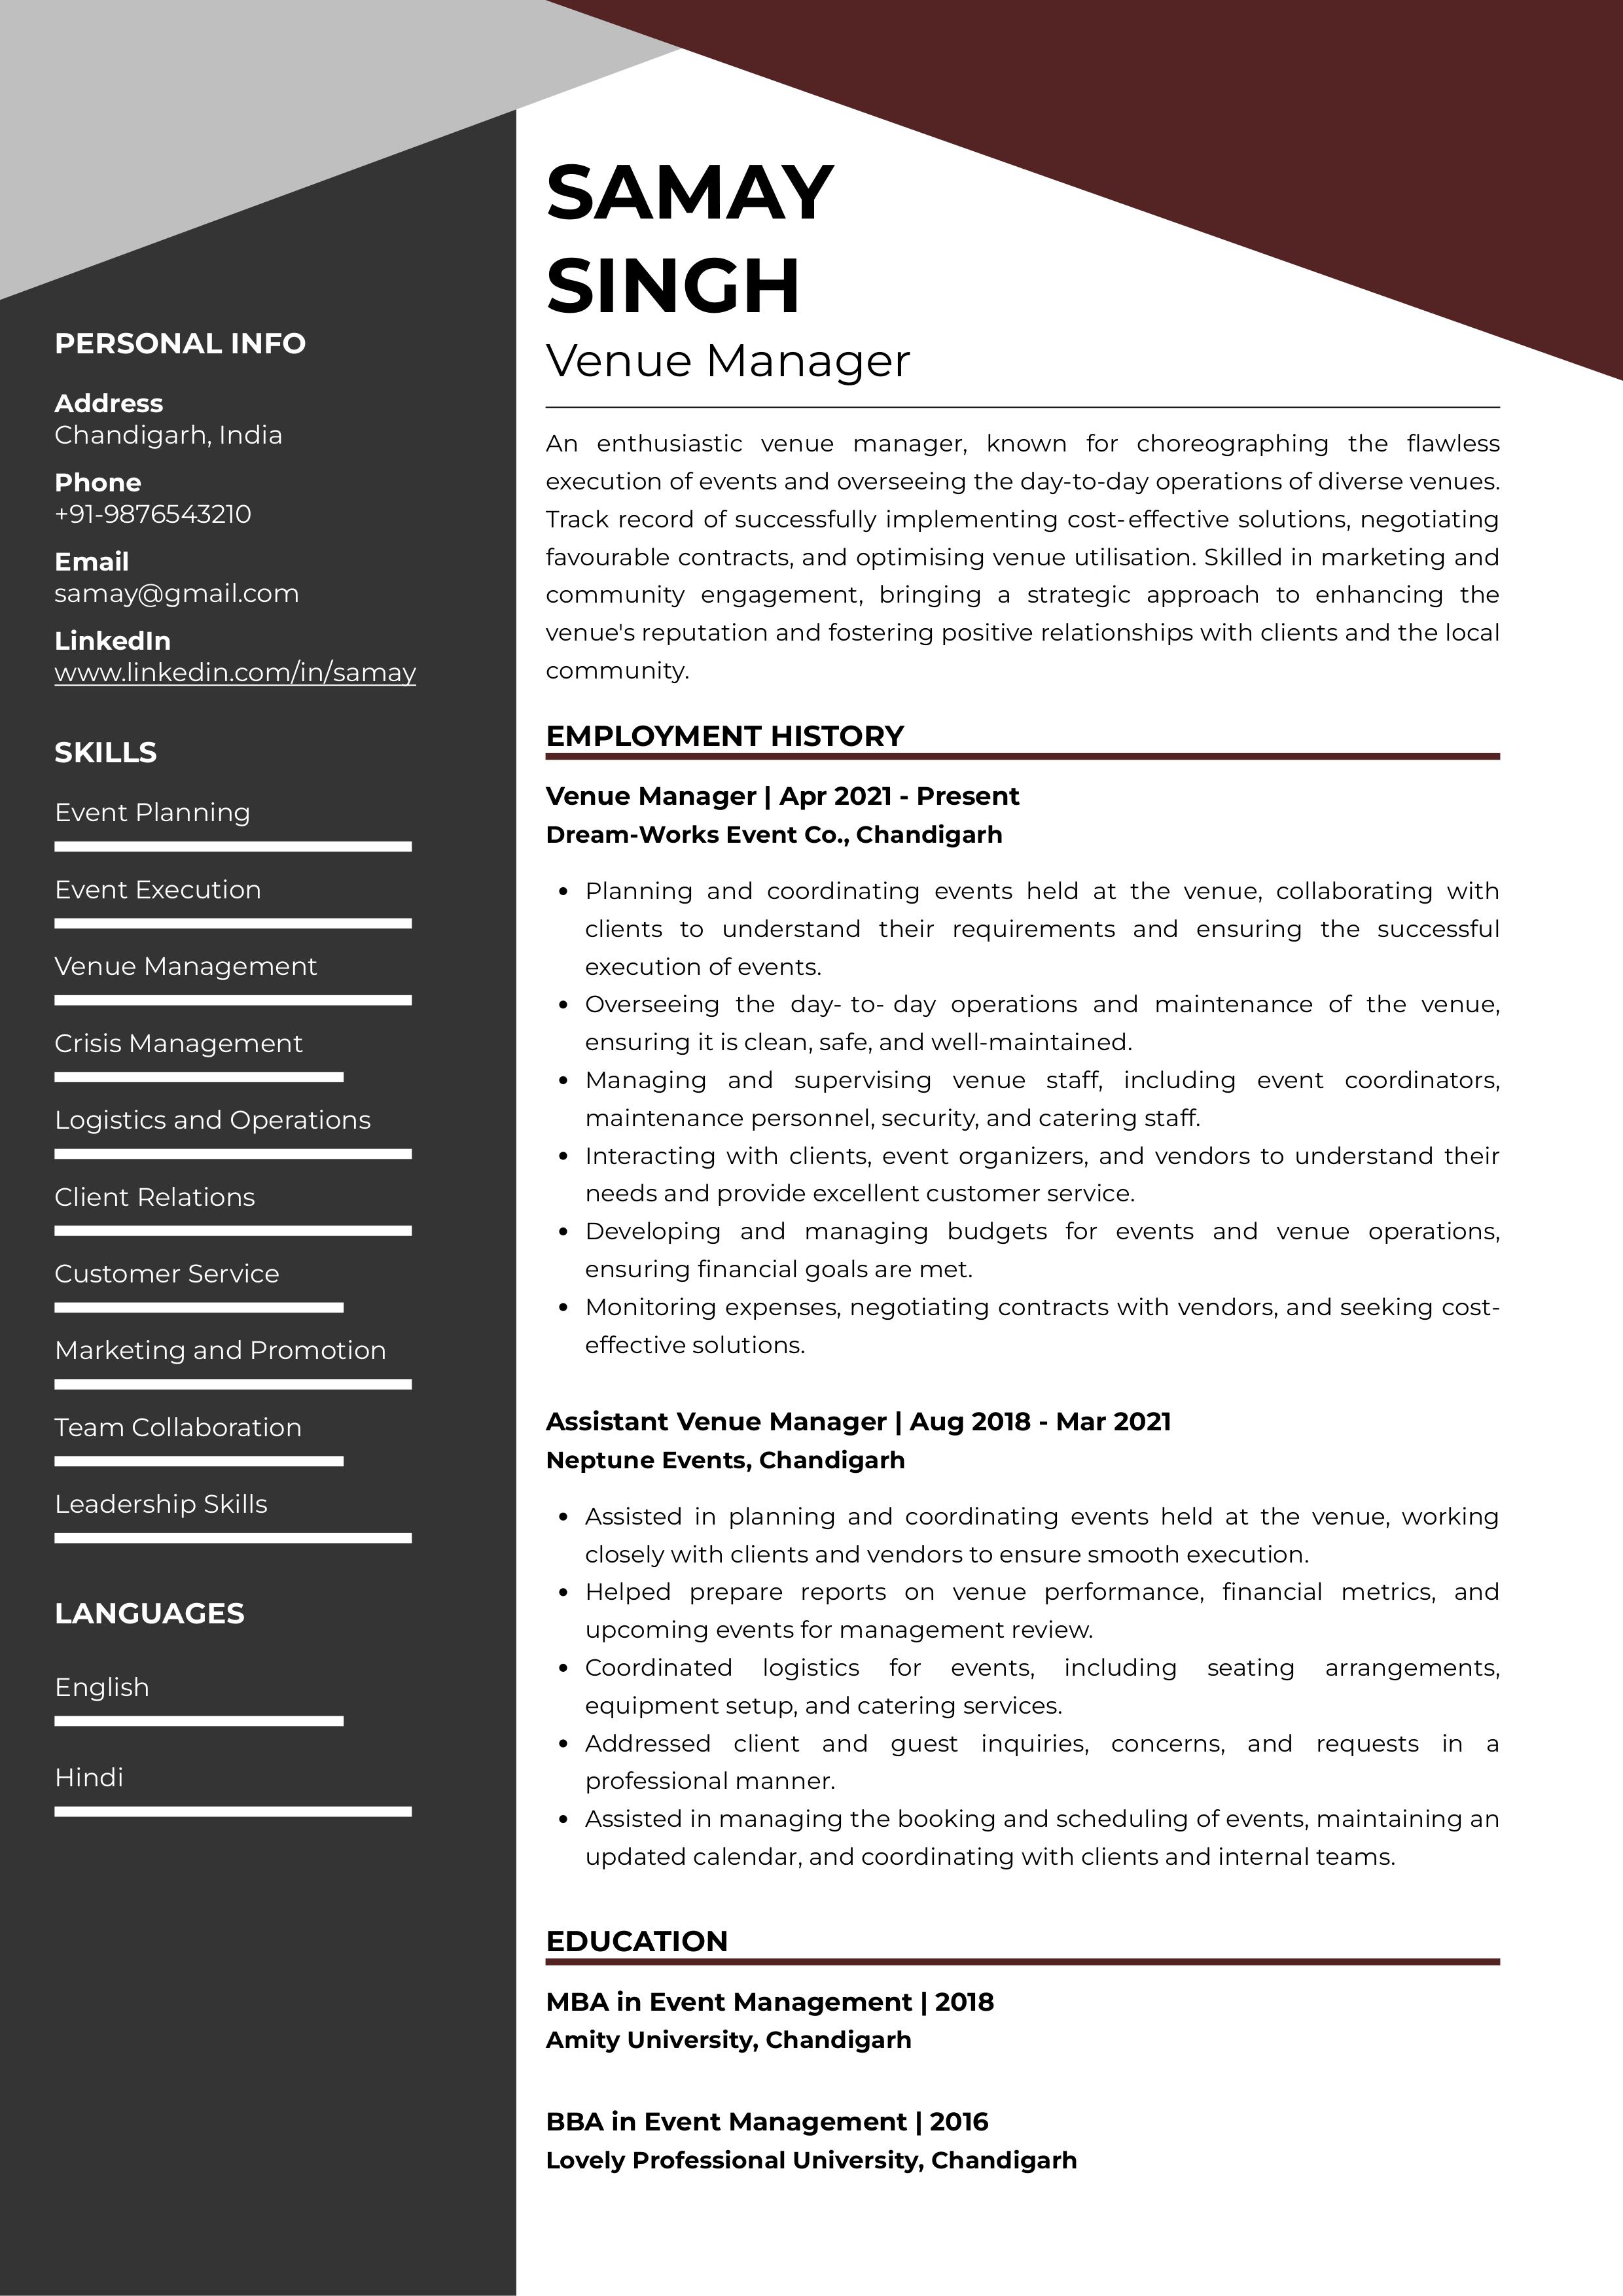 Sample Resume of Venue Manager | Free Resume Templates & Samples on Resumod.co